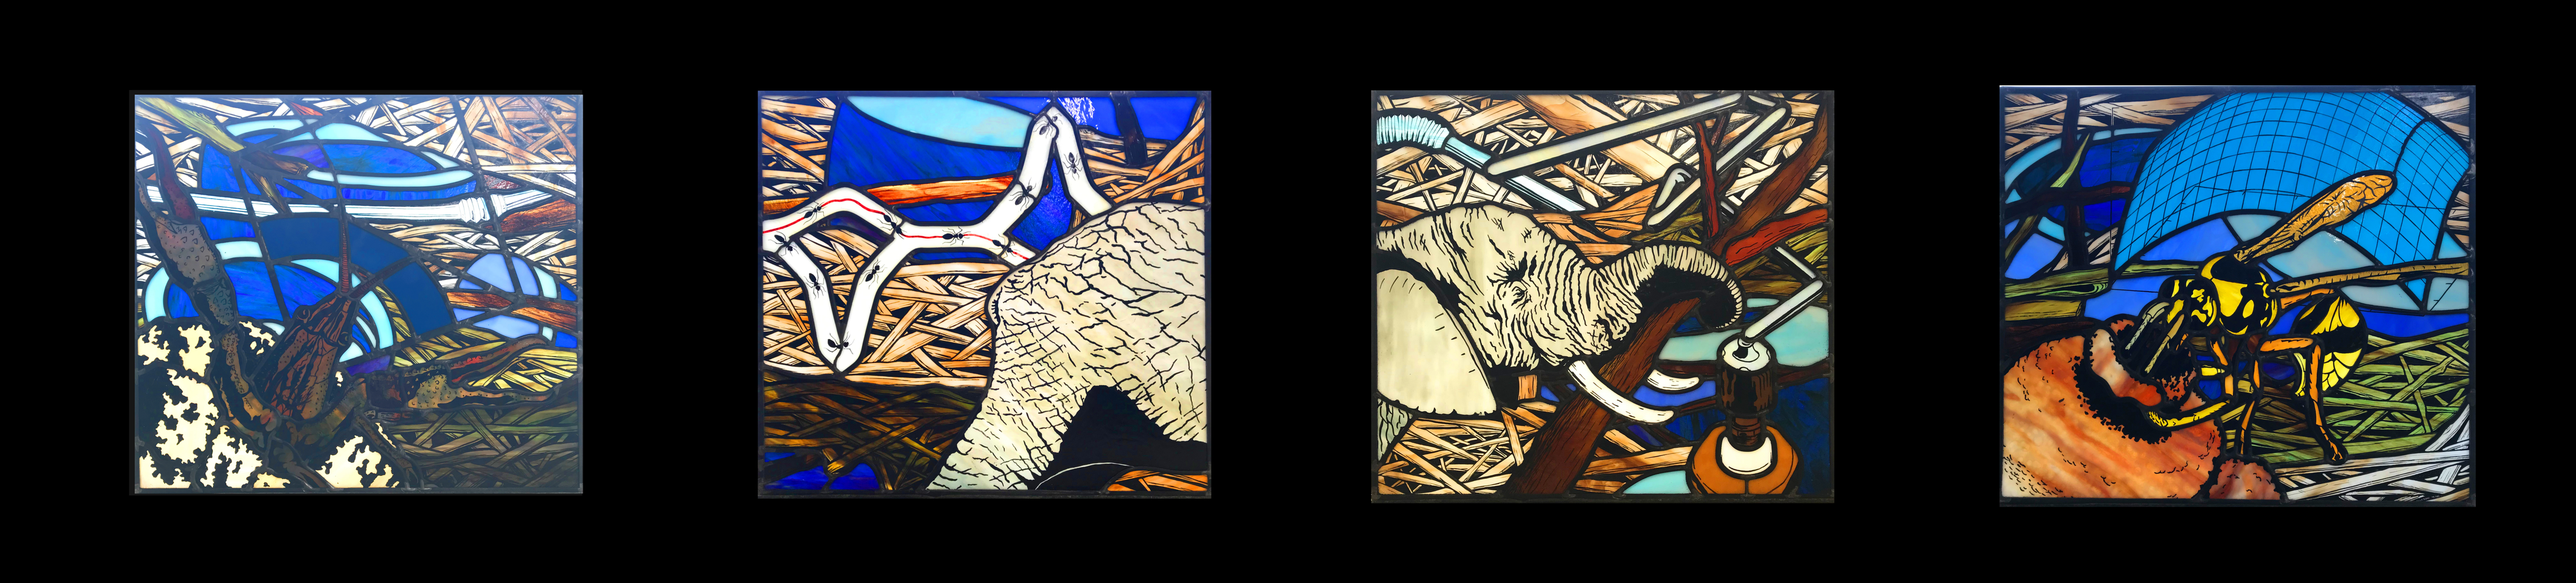 Up close image of stained-glass panels on dump truck 